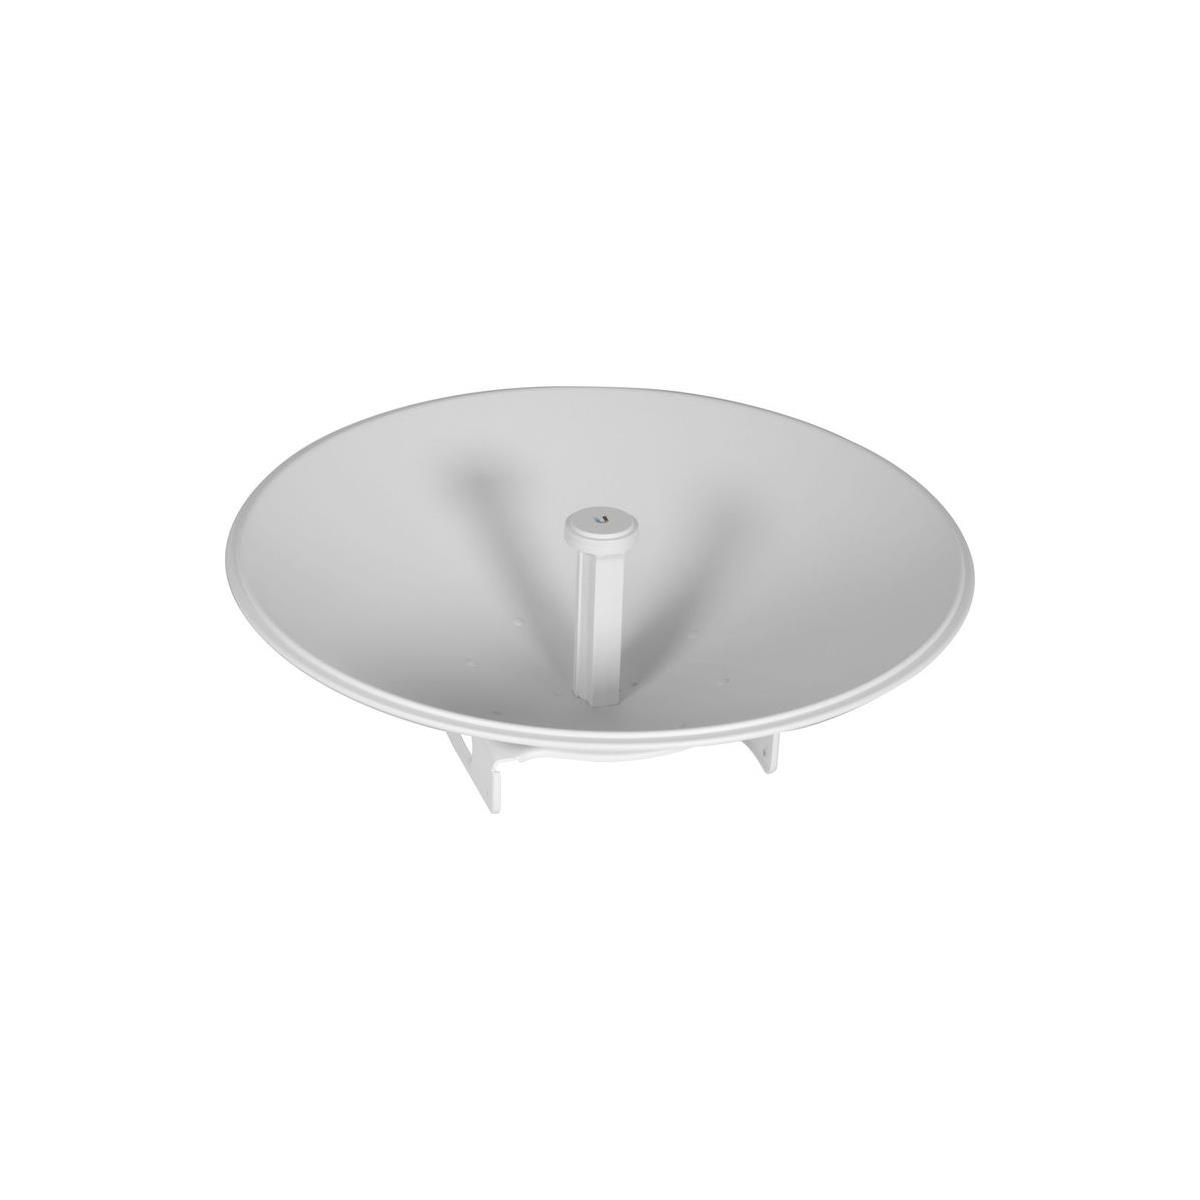 Image of Ubiquiti Networks PowerBeam ac 5GHz airMAX Bridge with 620mm Dish Reflector